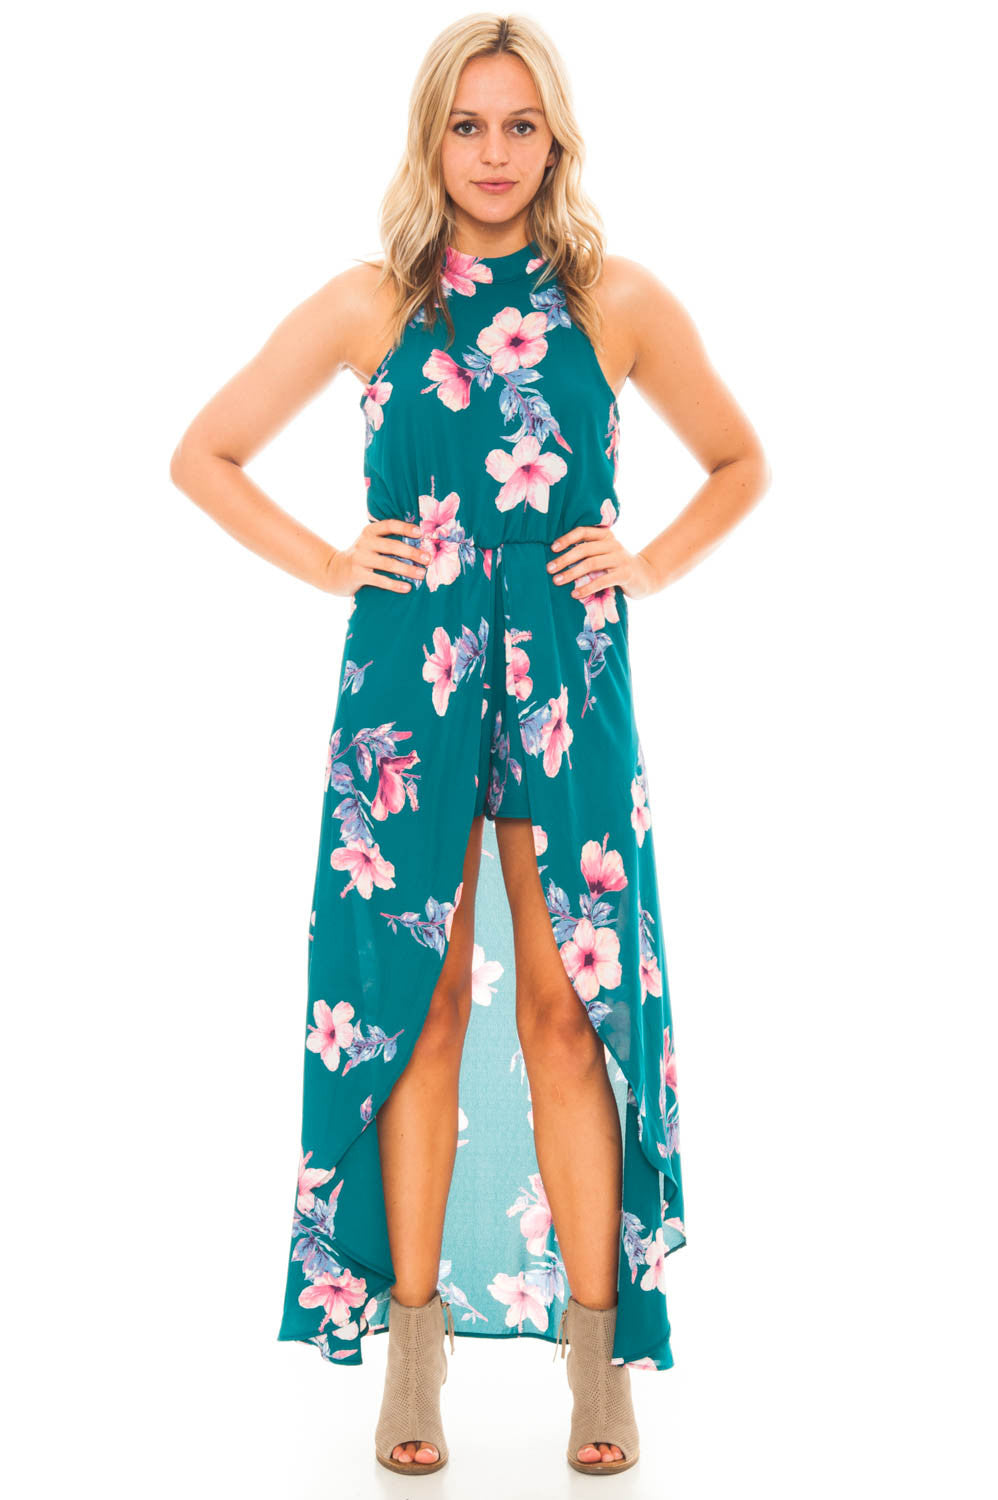 Floral Romper With Skirt Overlay ...